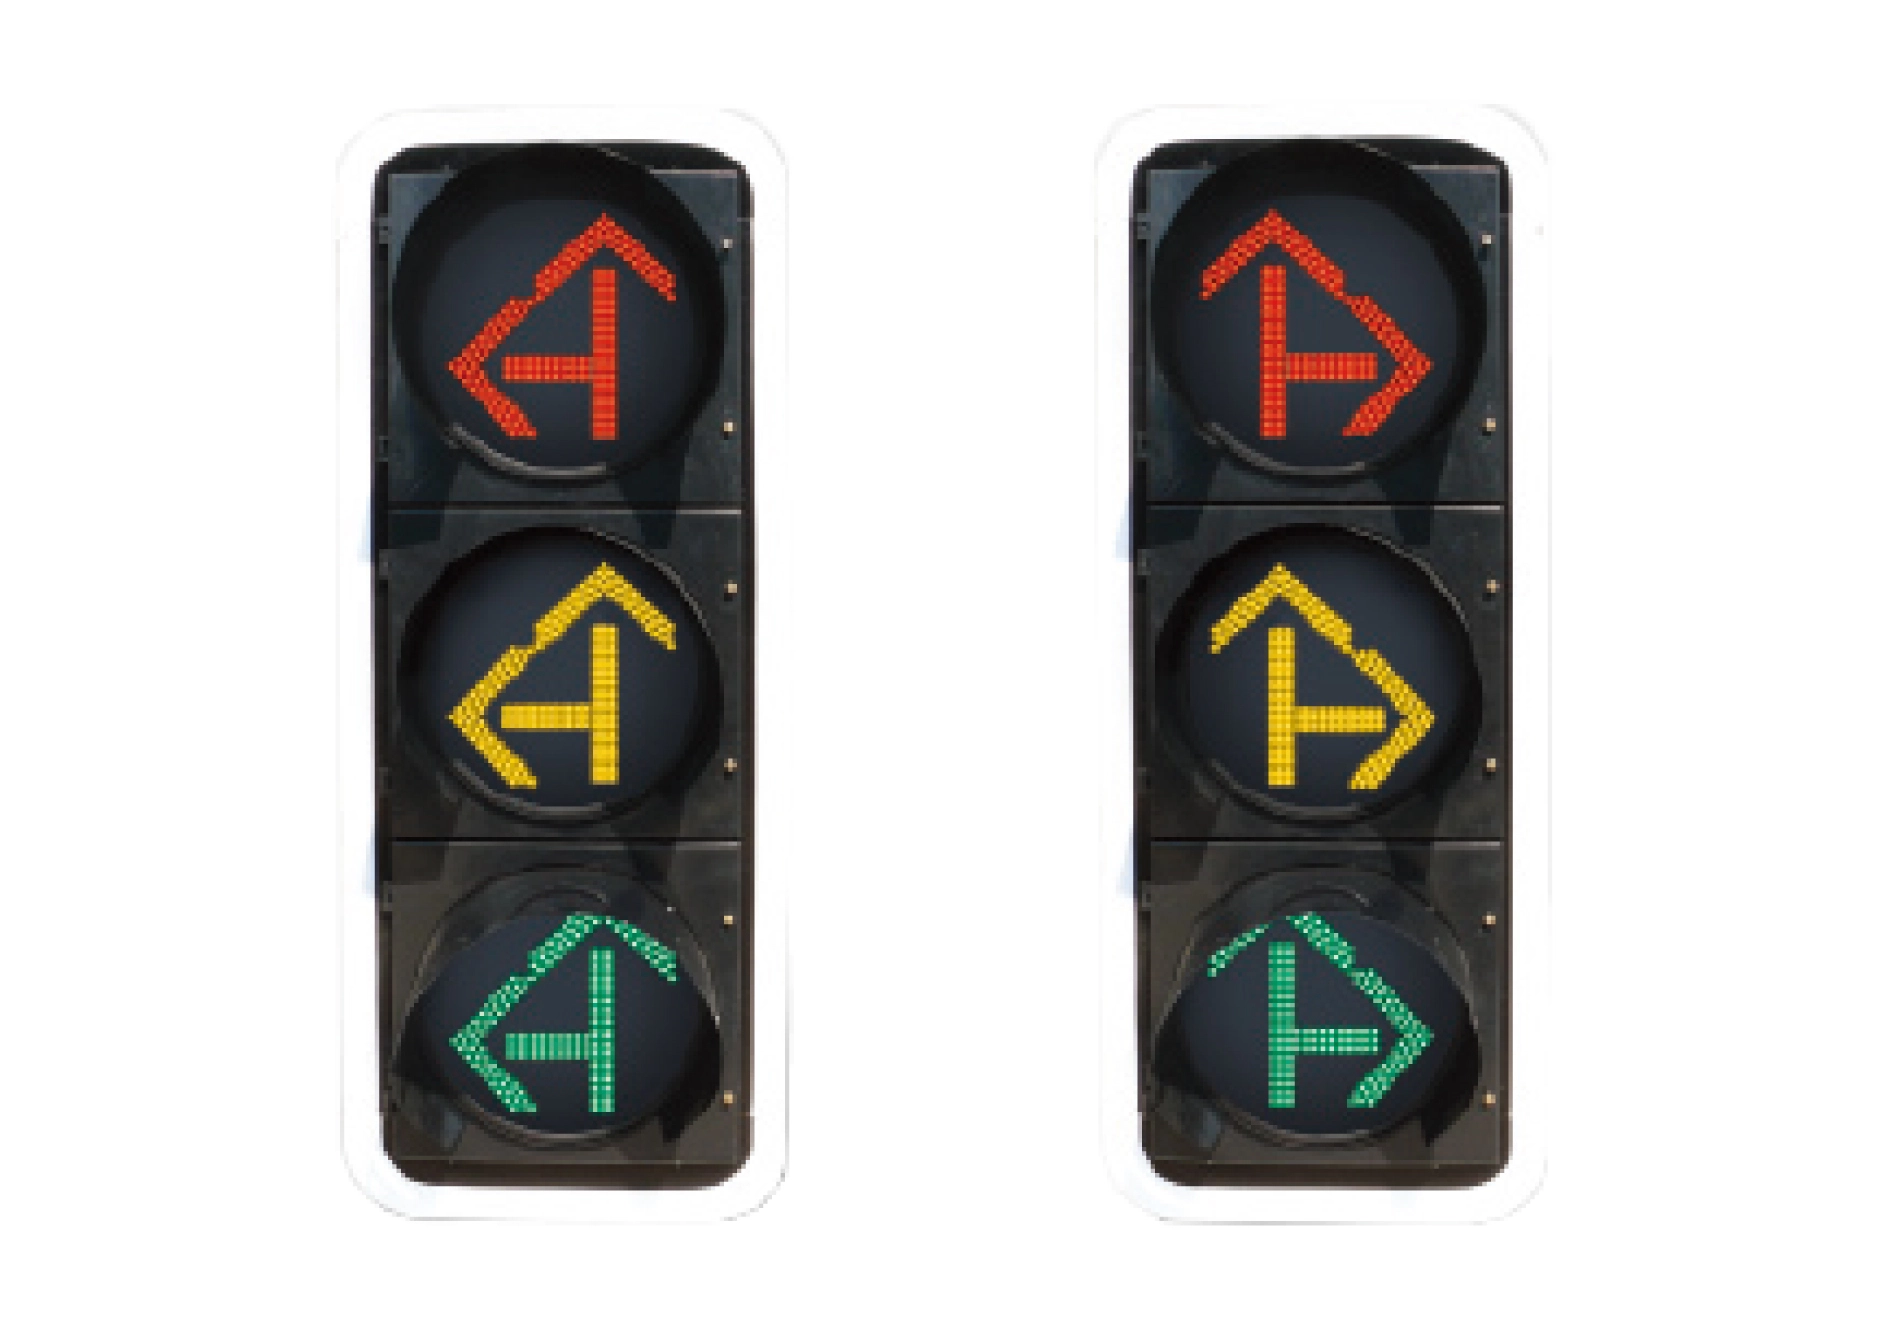 red traffic light with green arrow